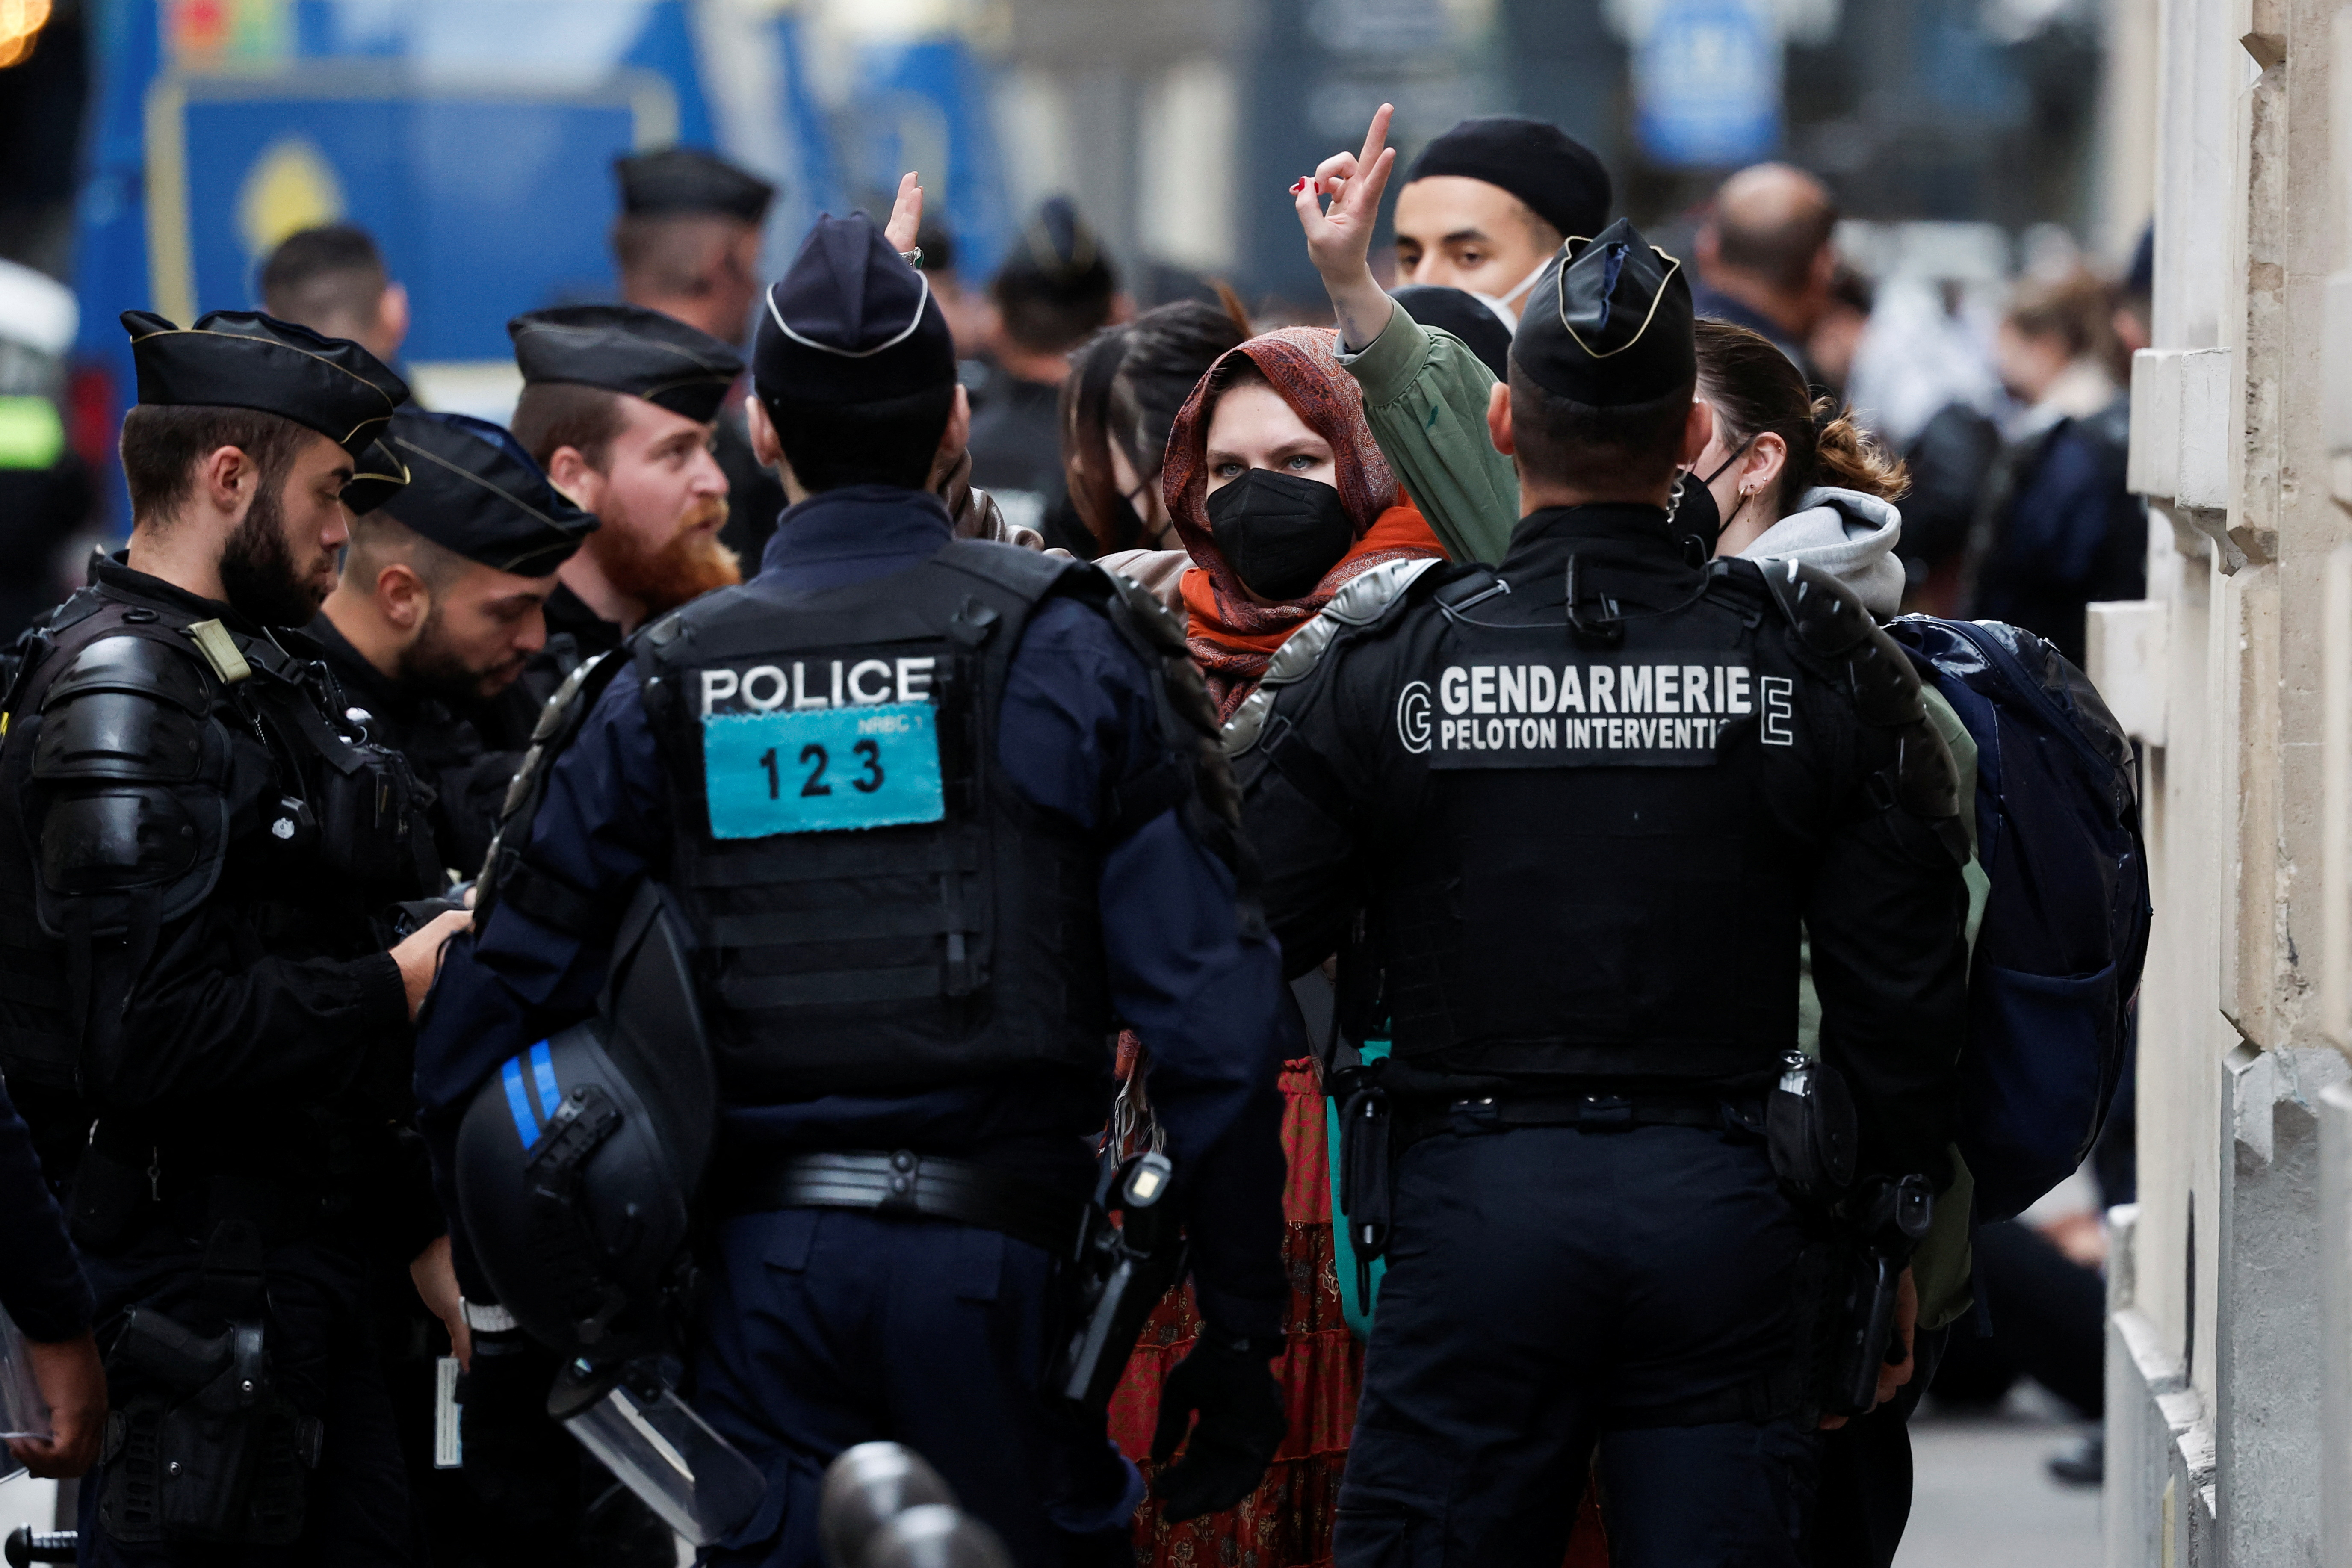 Protesters in support of Palestinians in Gaza are escorted away by police forces during the evacuation of the Sciences Po University, in Paris